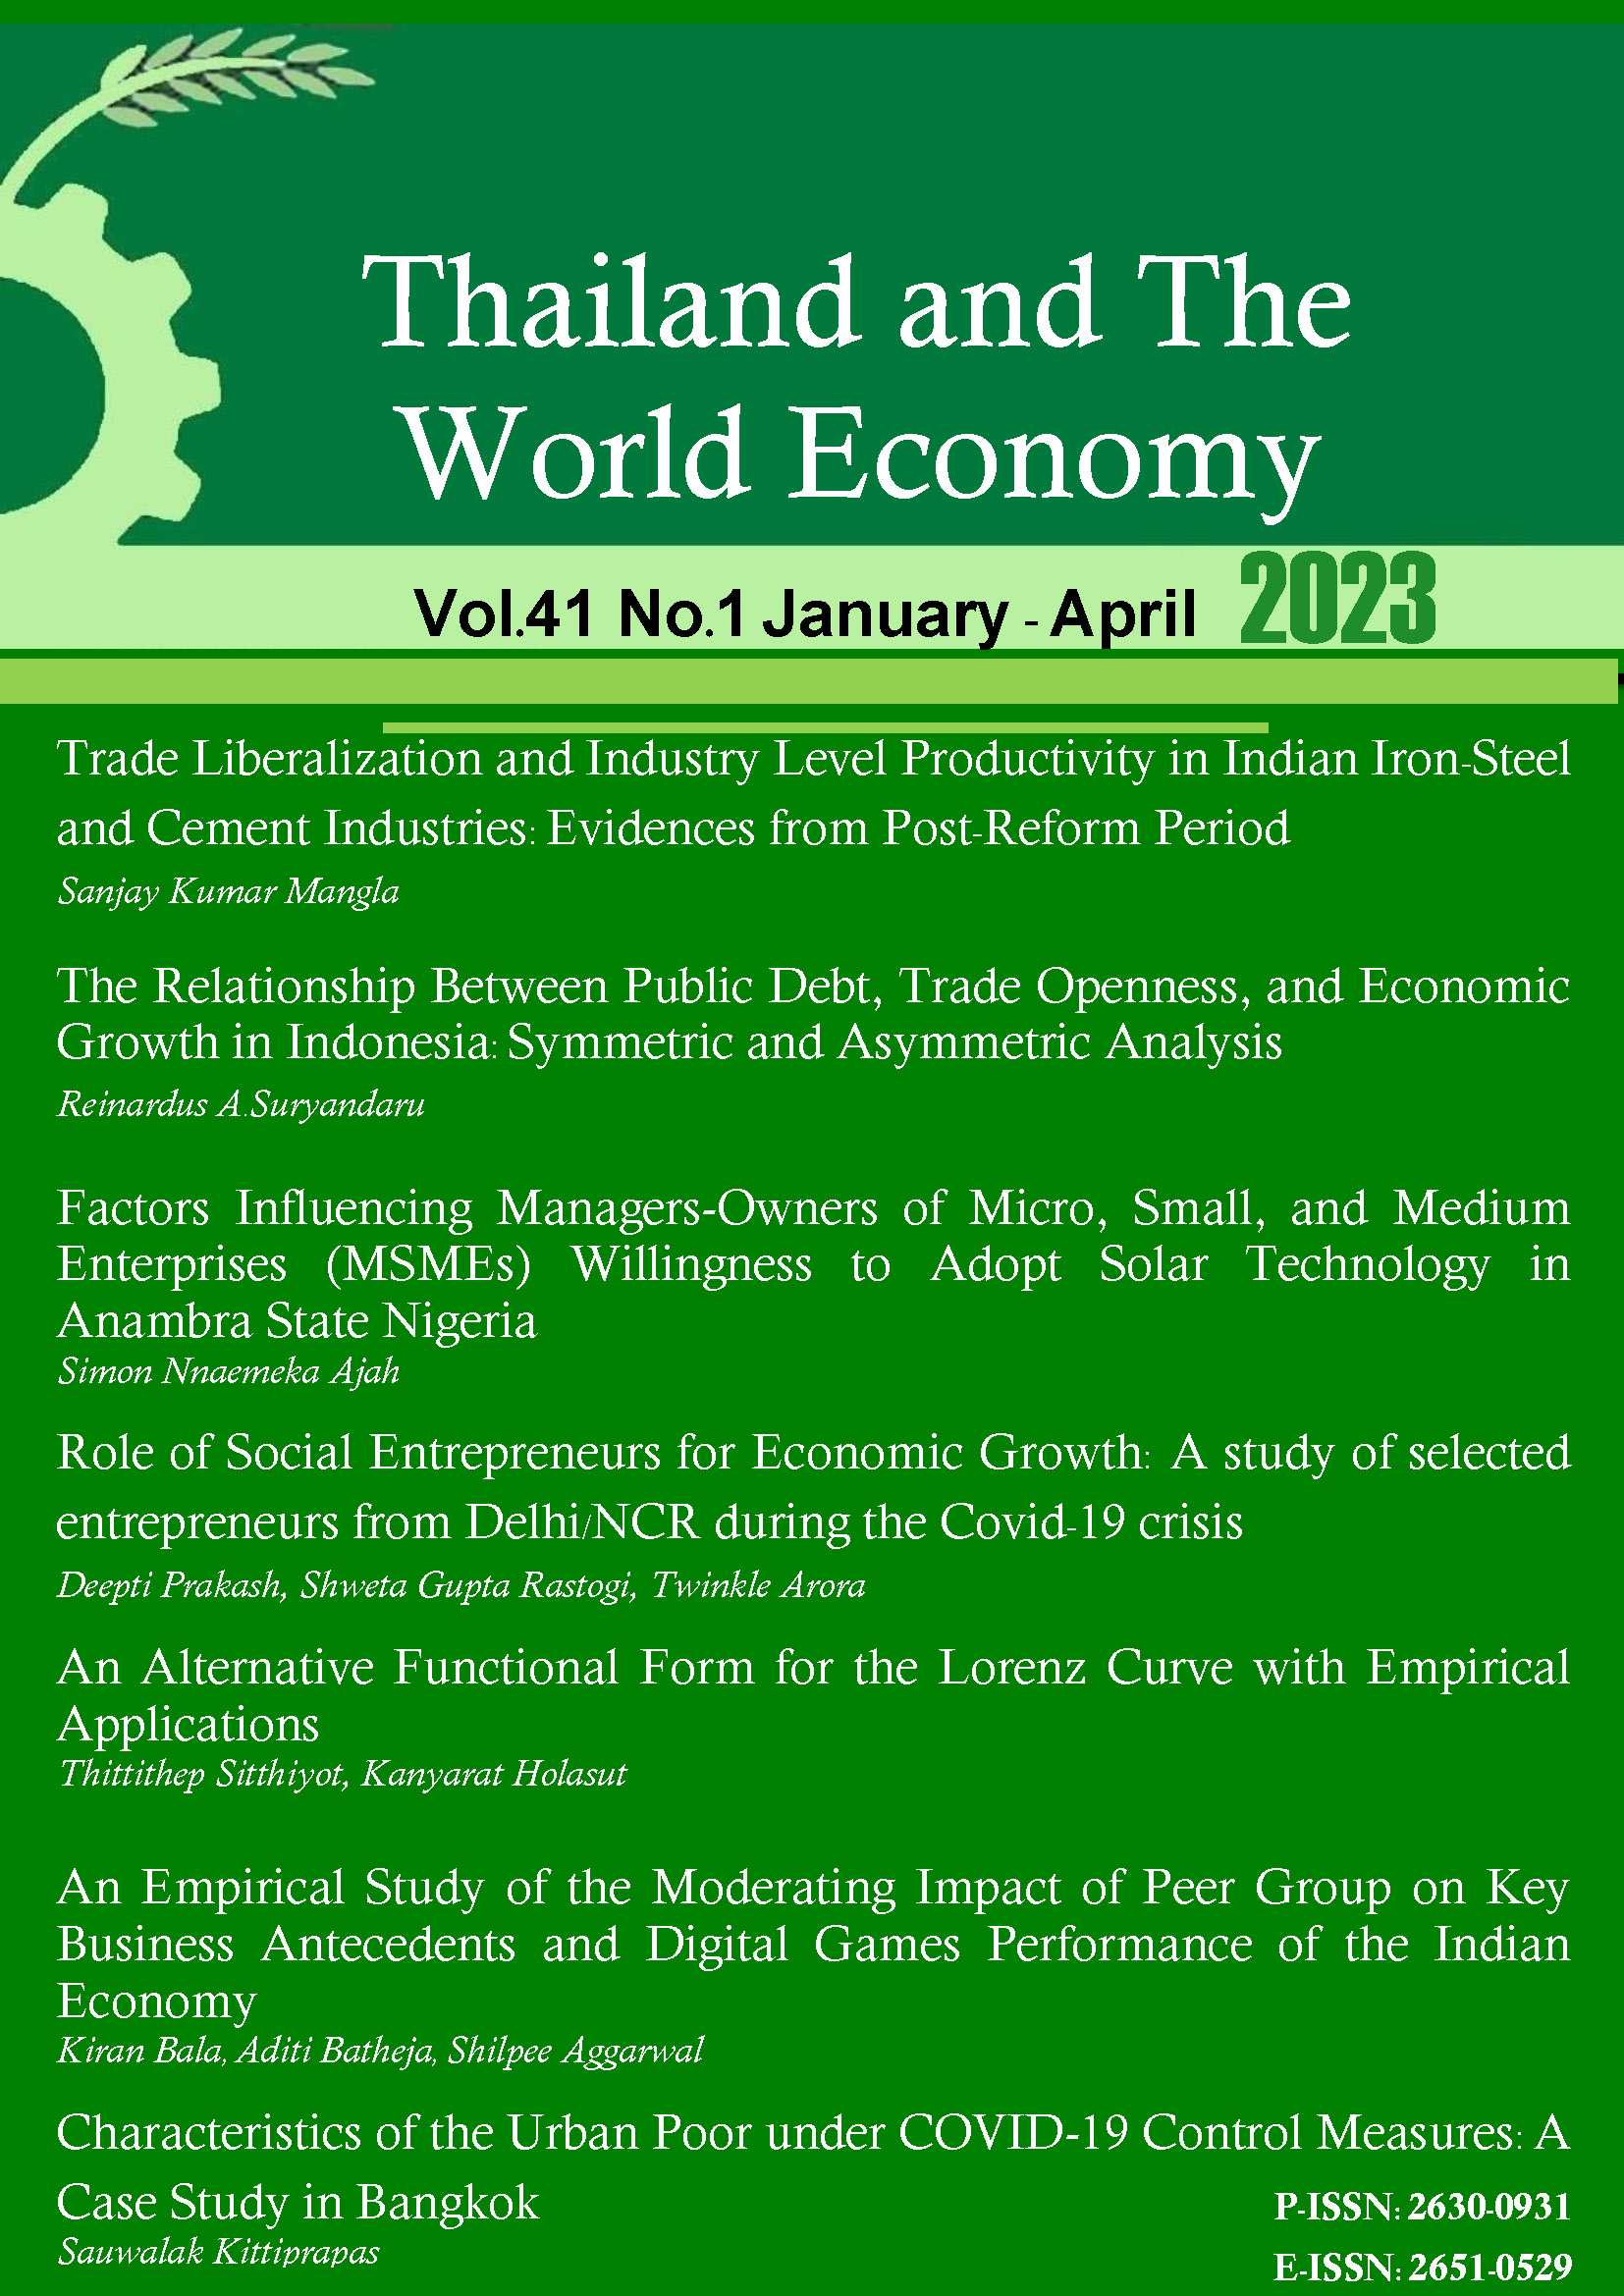 					View Vol. 41 No. 1 (2023): Thailand and The World Economy
				